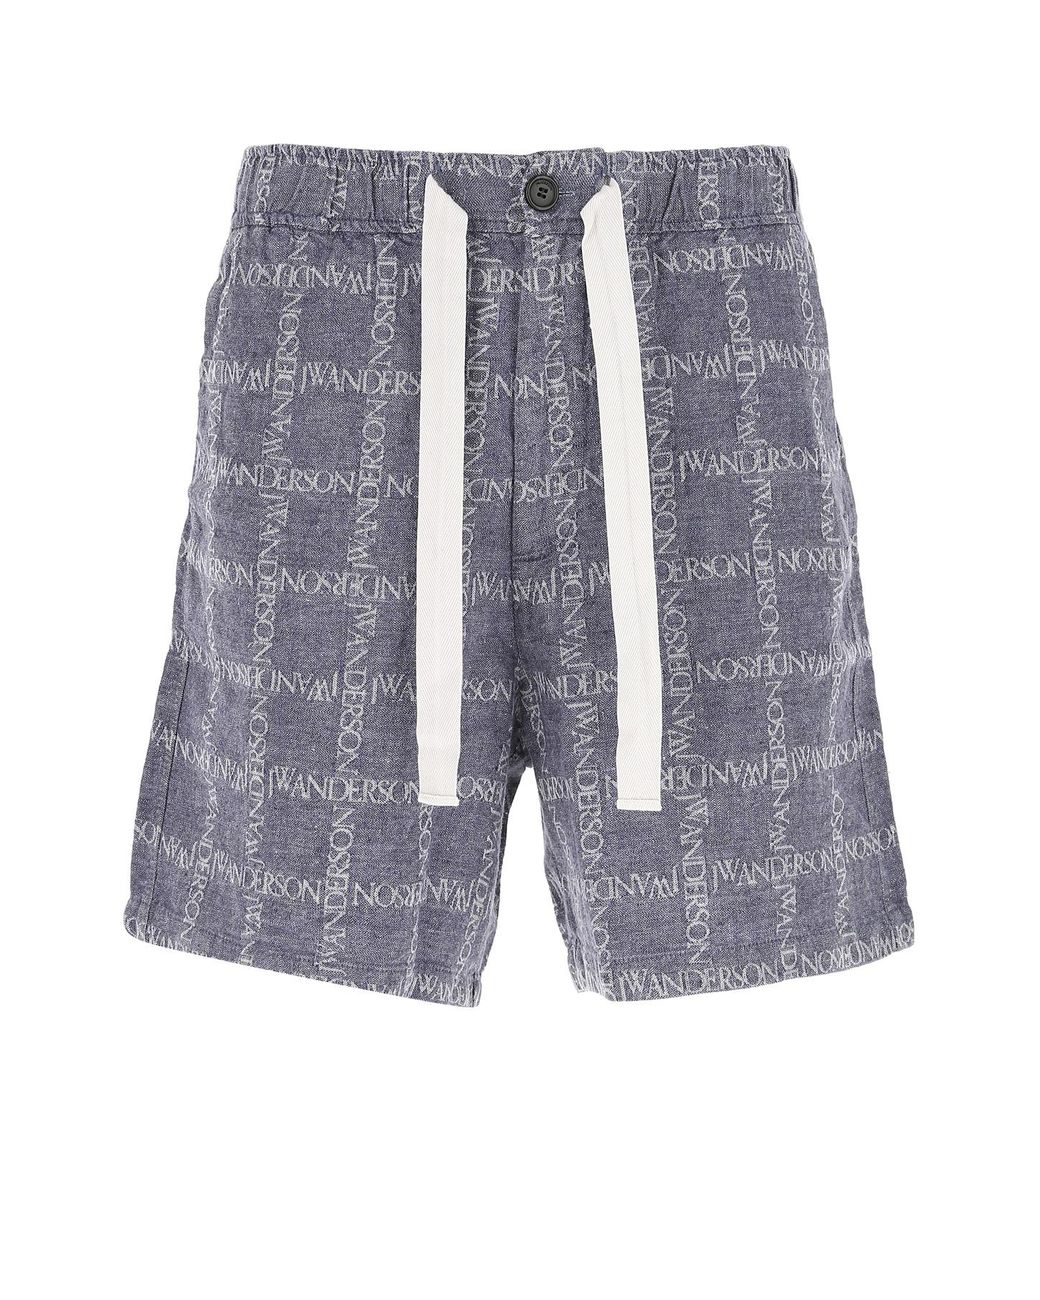 JW Anderson Embroidered Linen Bermuda Shorts in Blue for Men - Lyst